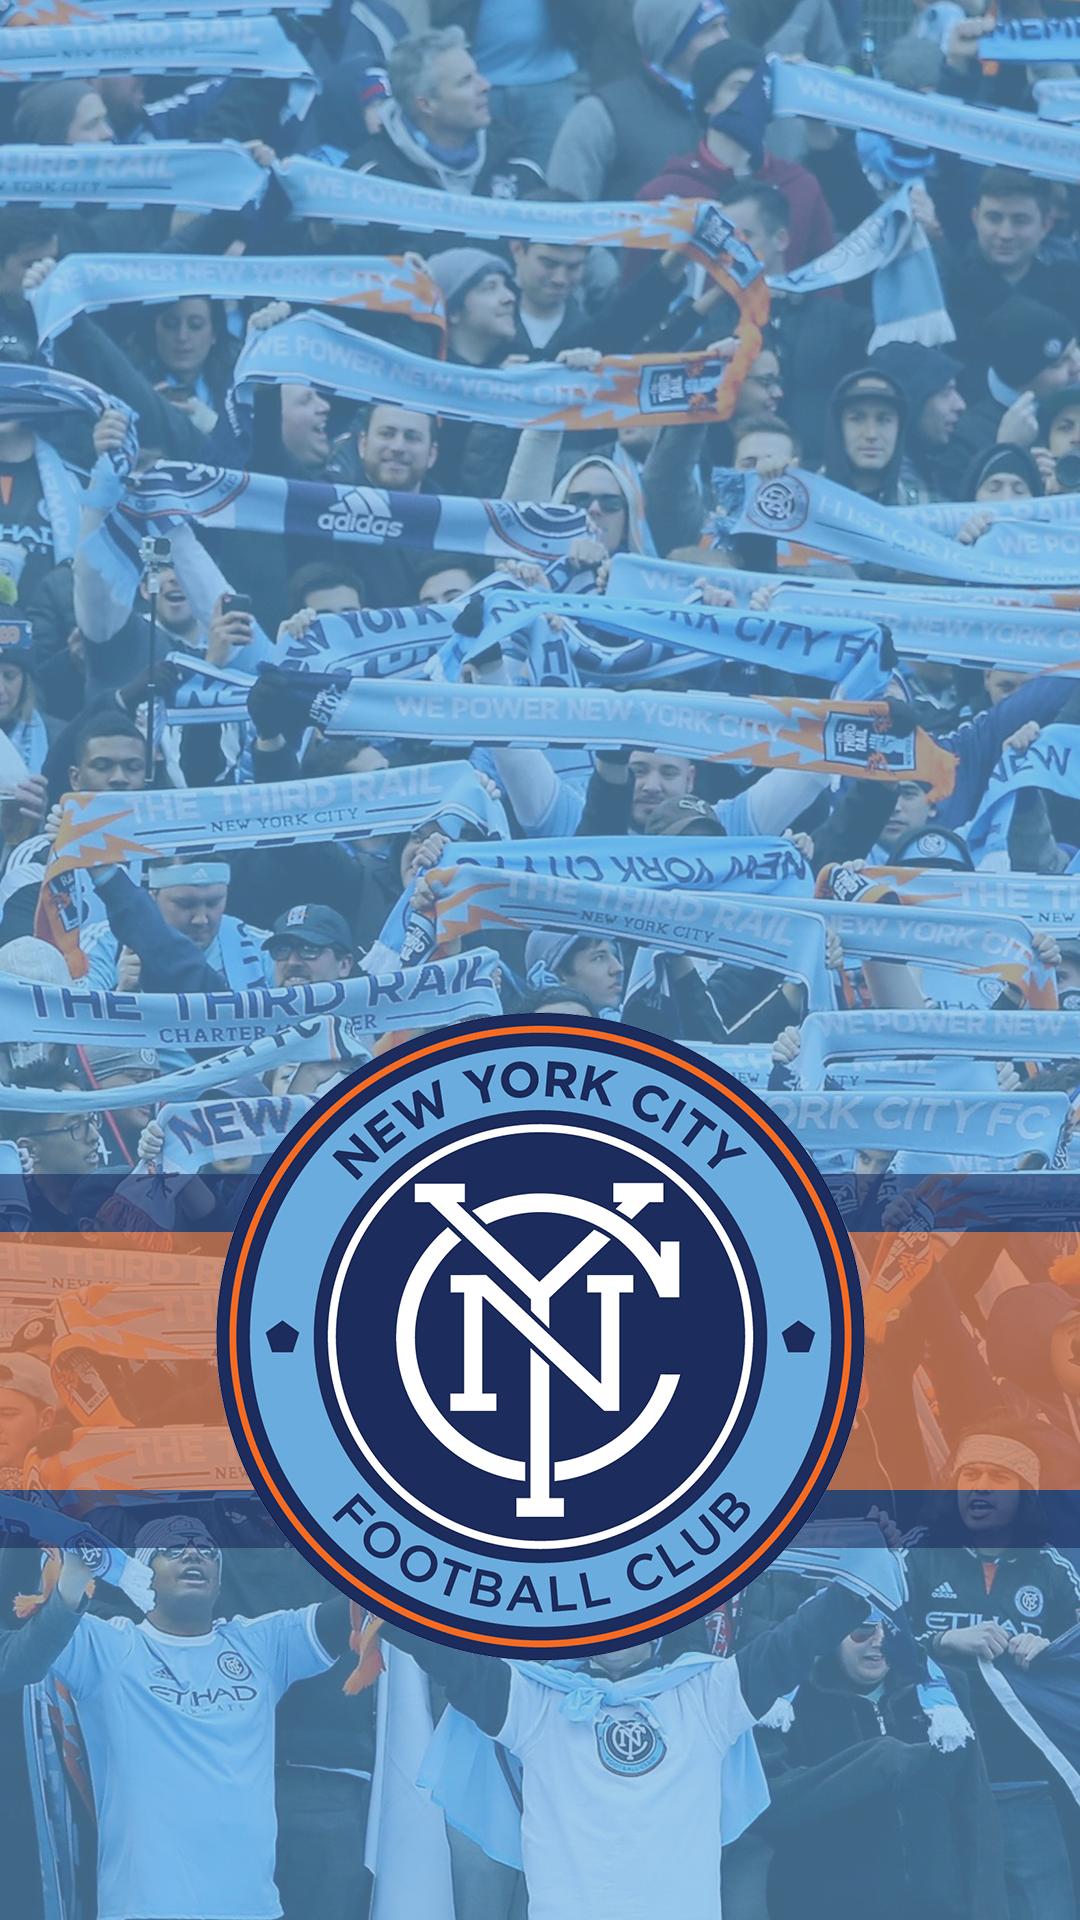 Inspired By A Post Over At R Baseball, I Made A Few NYCFC Phone Wallpaper